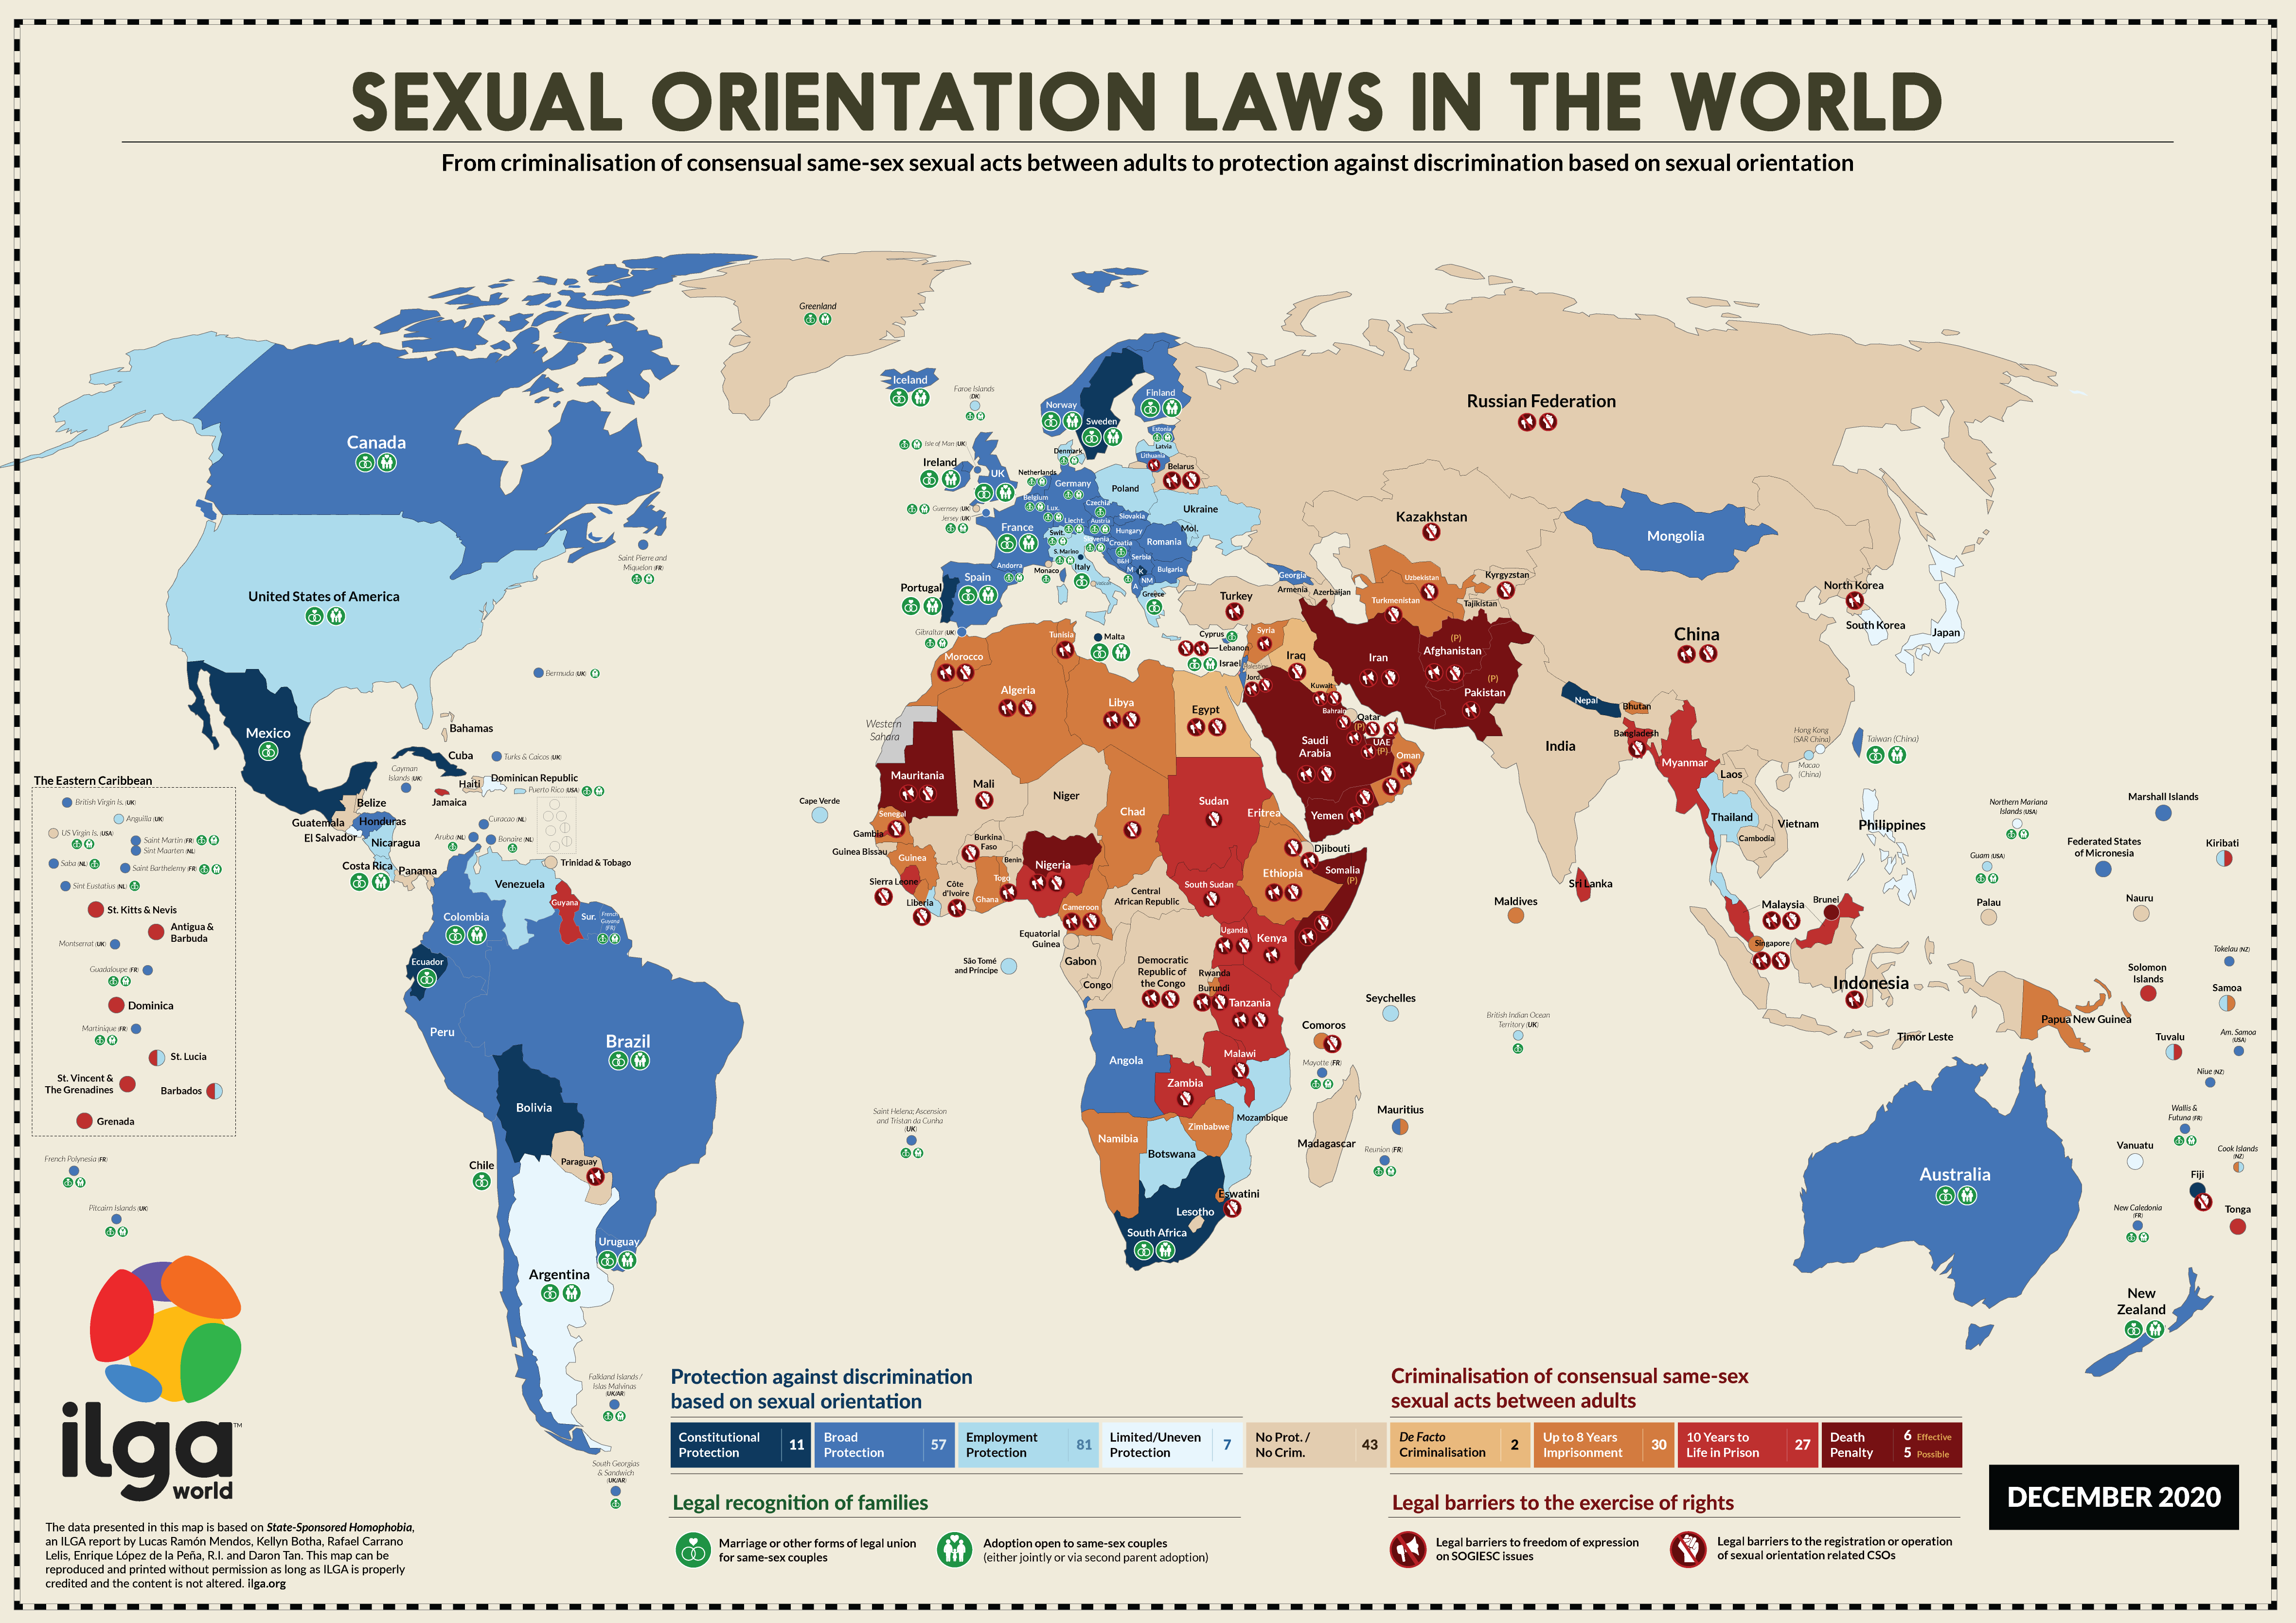 The International Lesbian, Gay, Bisexual, Trans and Intersex Association’s map of sexual orientation laws across the world